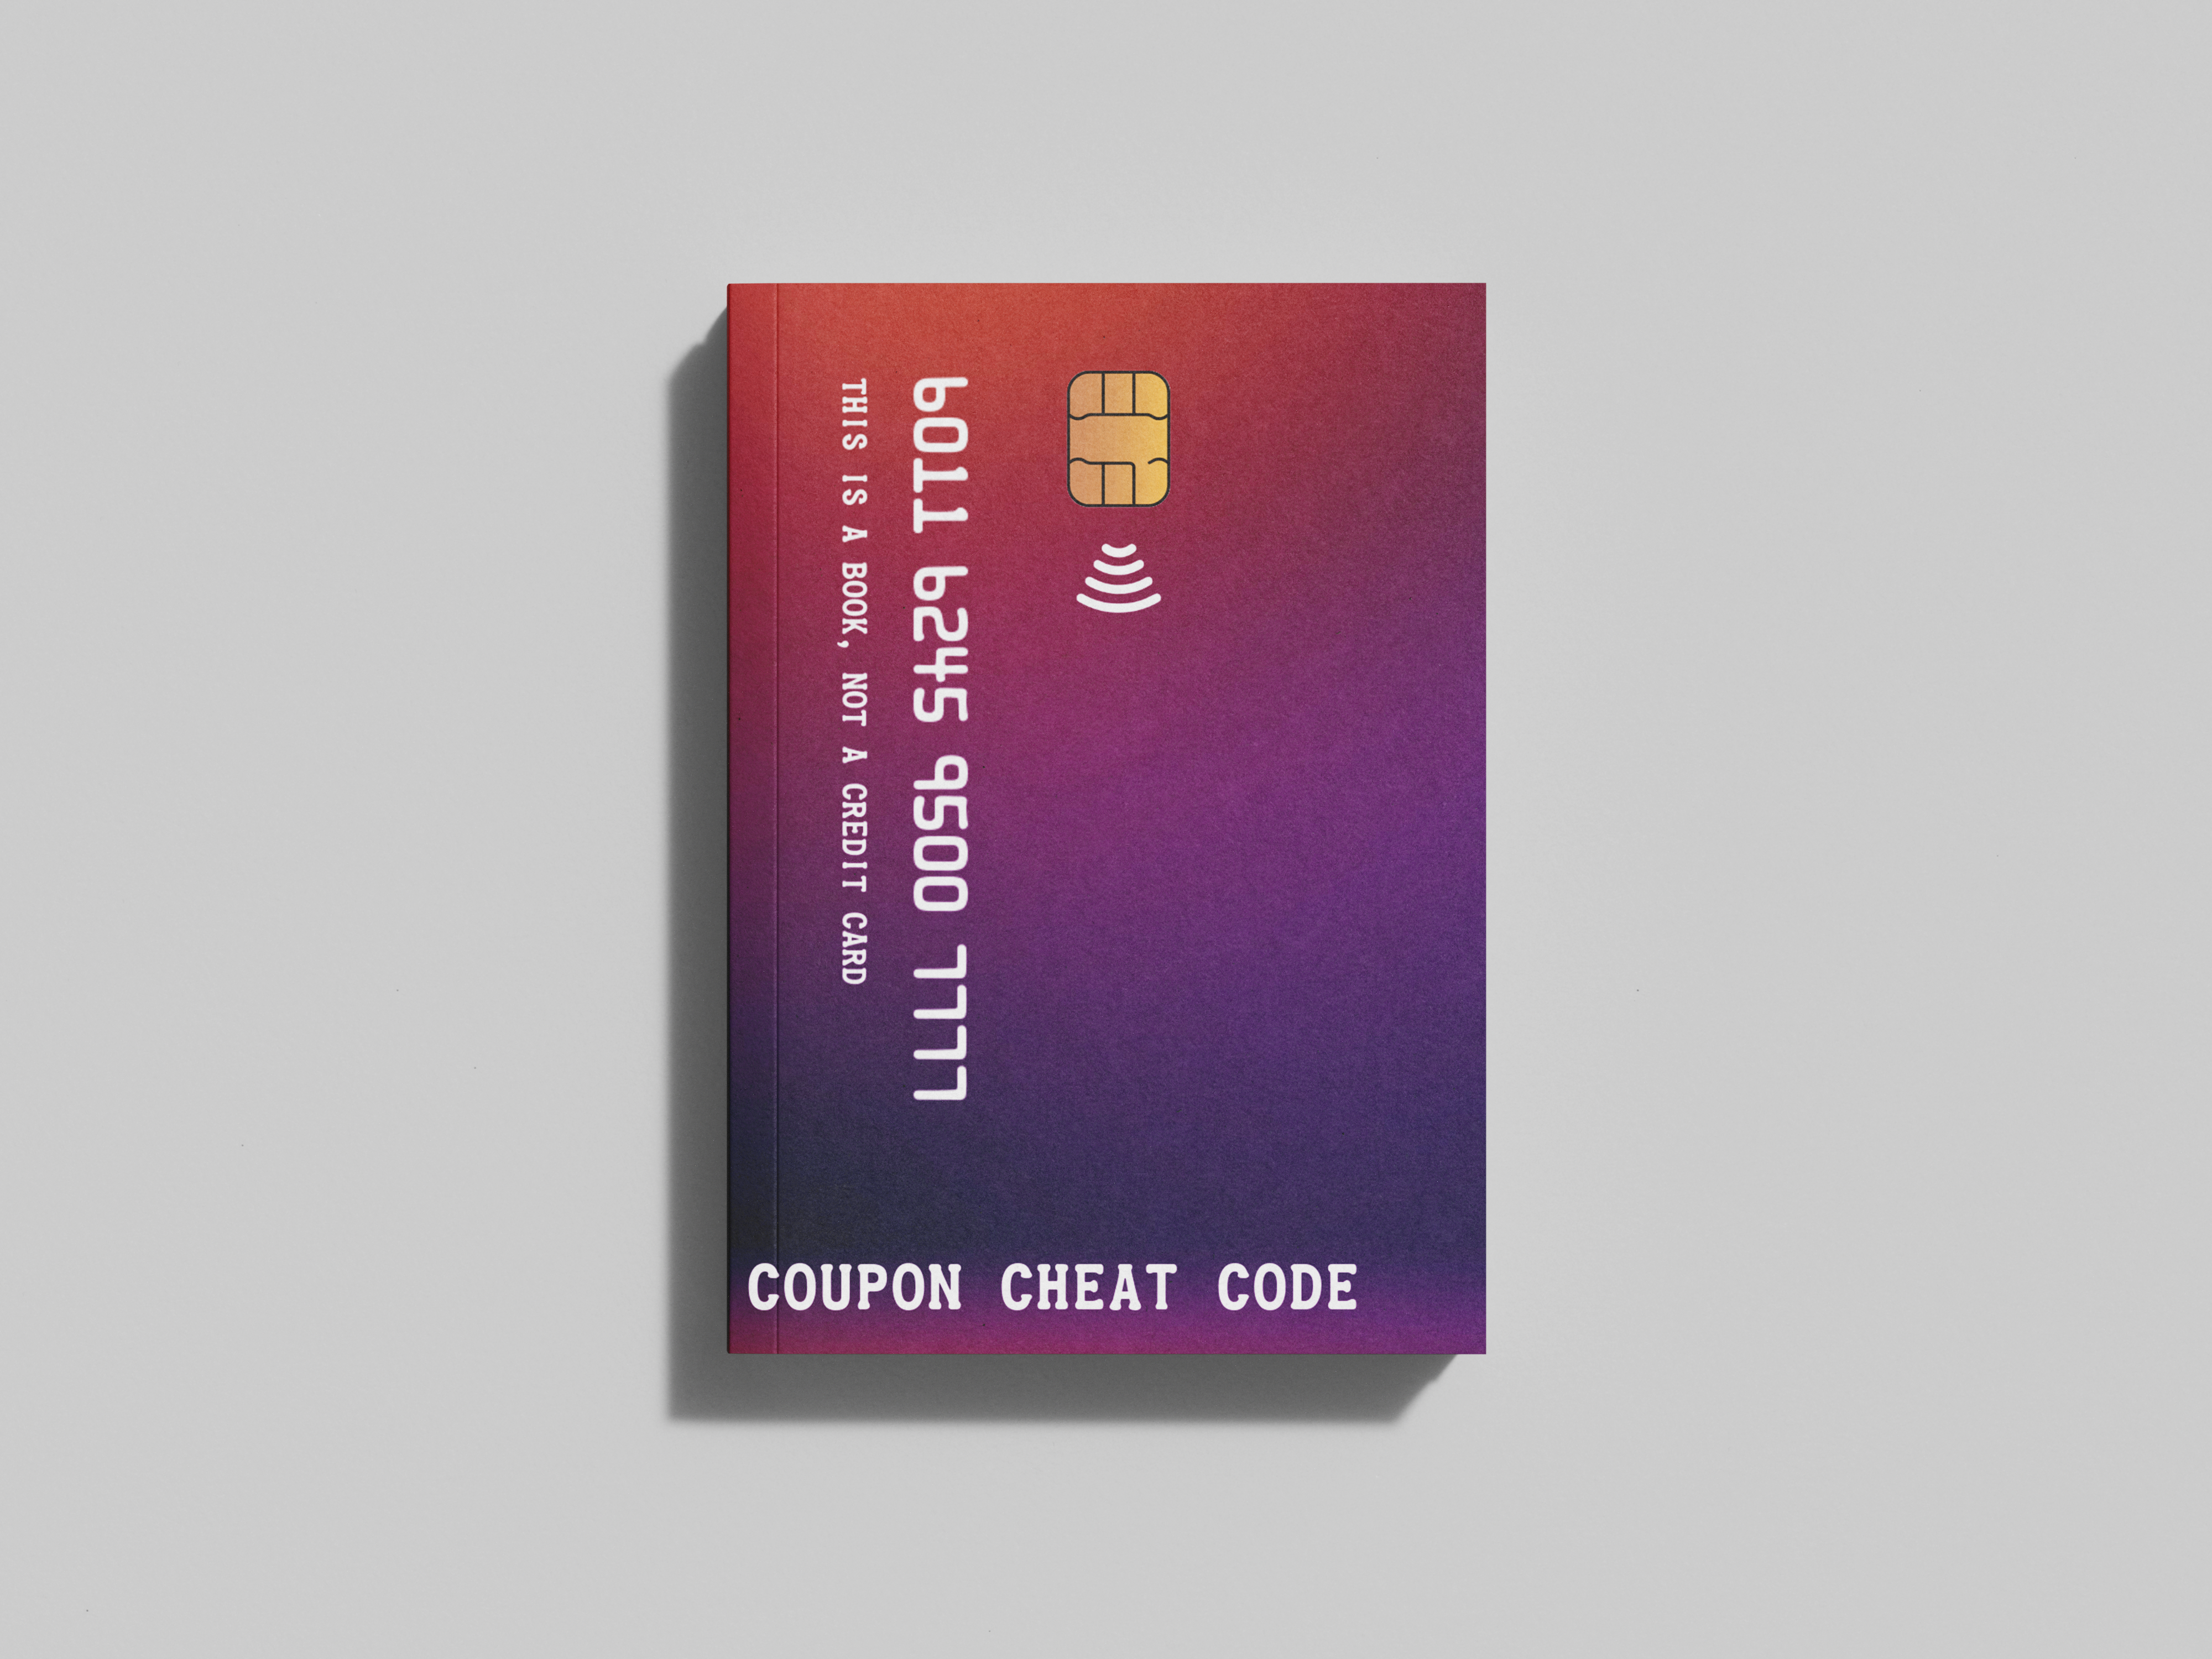 The Coupon Cheat Code - Paperback Edition